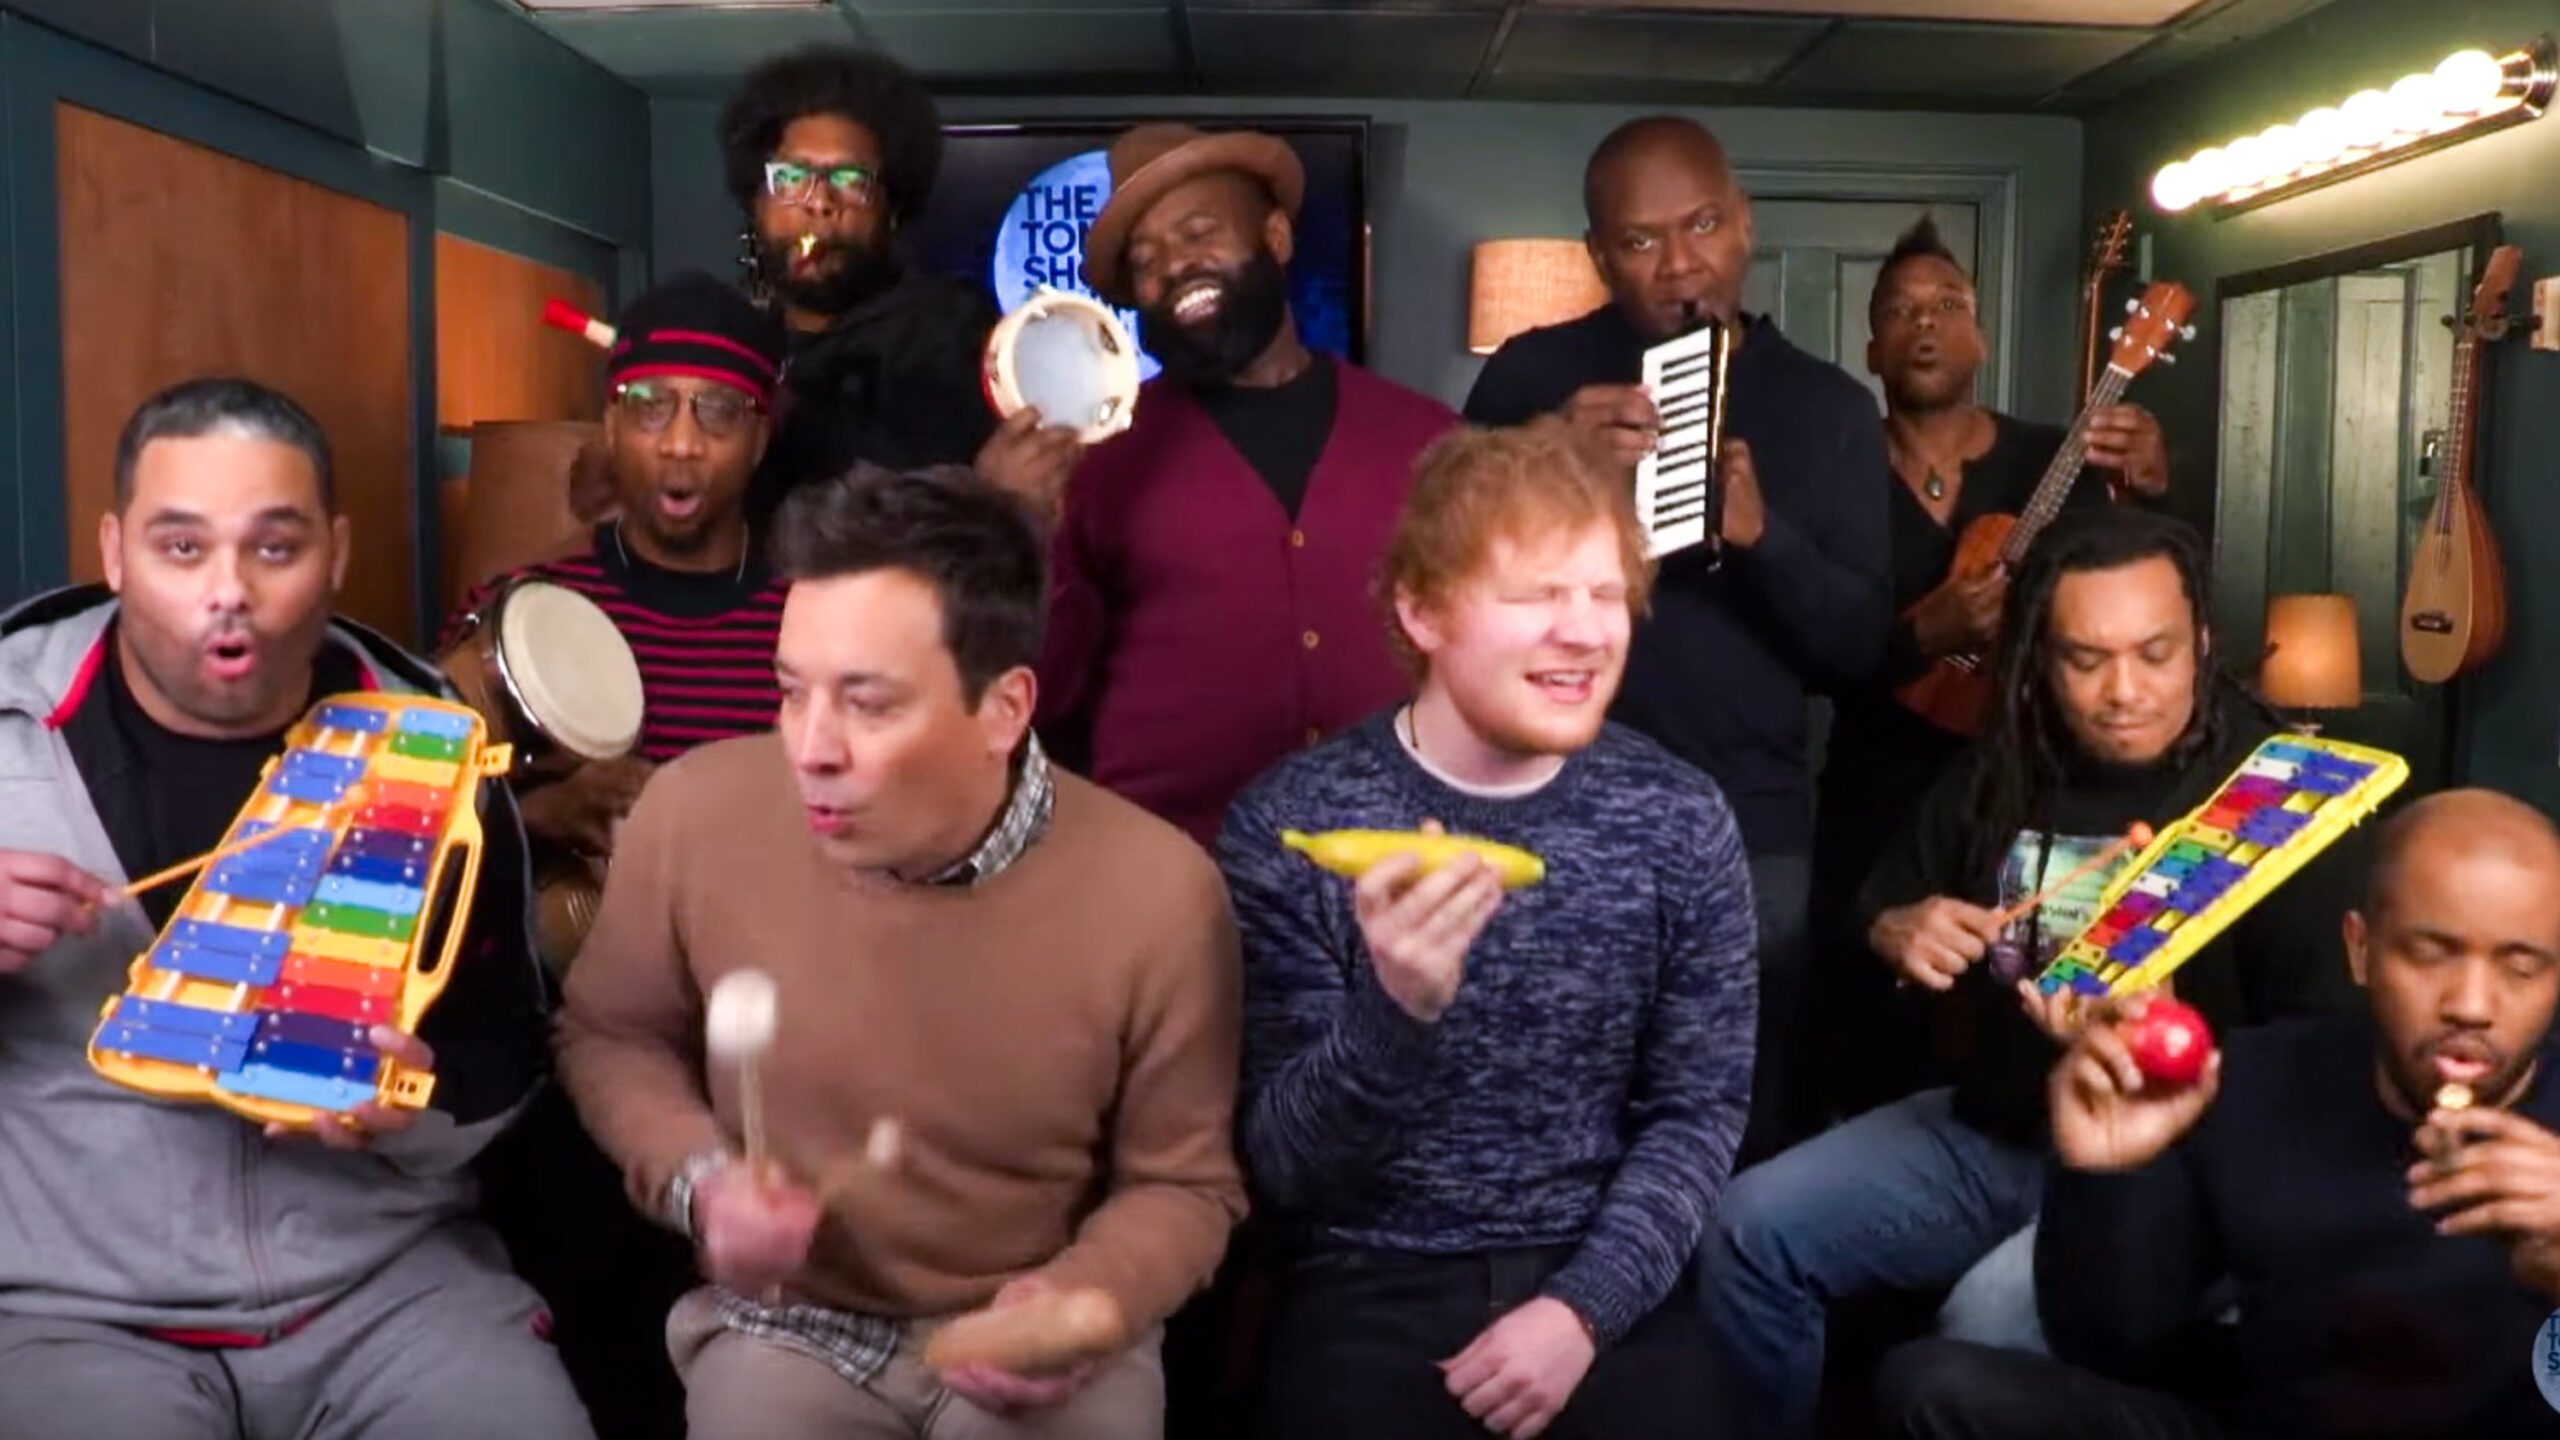 WATCH: Ed Sheeran, Jimmy Fallon, The Roots sing ‘Shape of You’ with classroom instruments